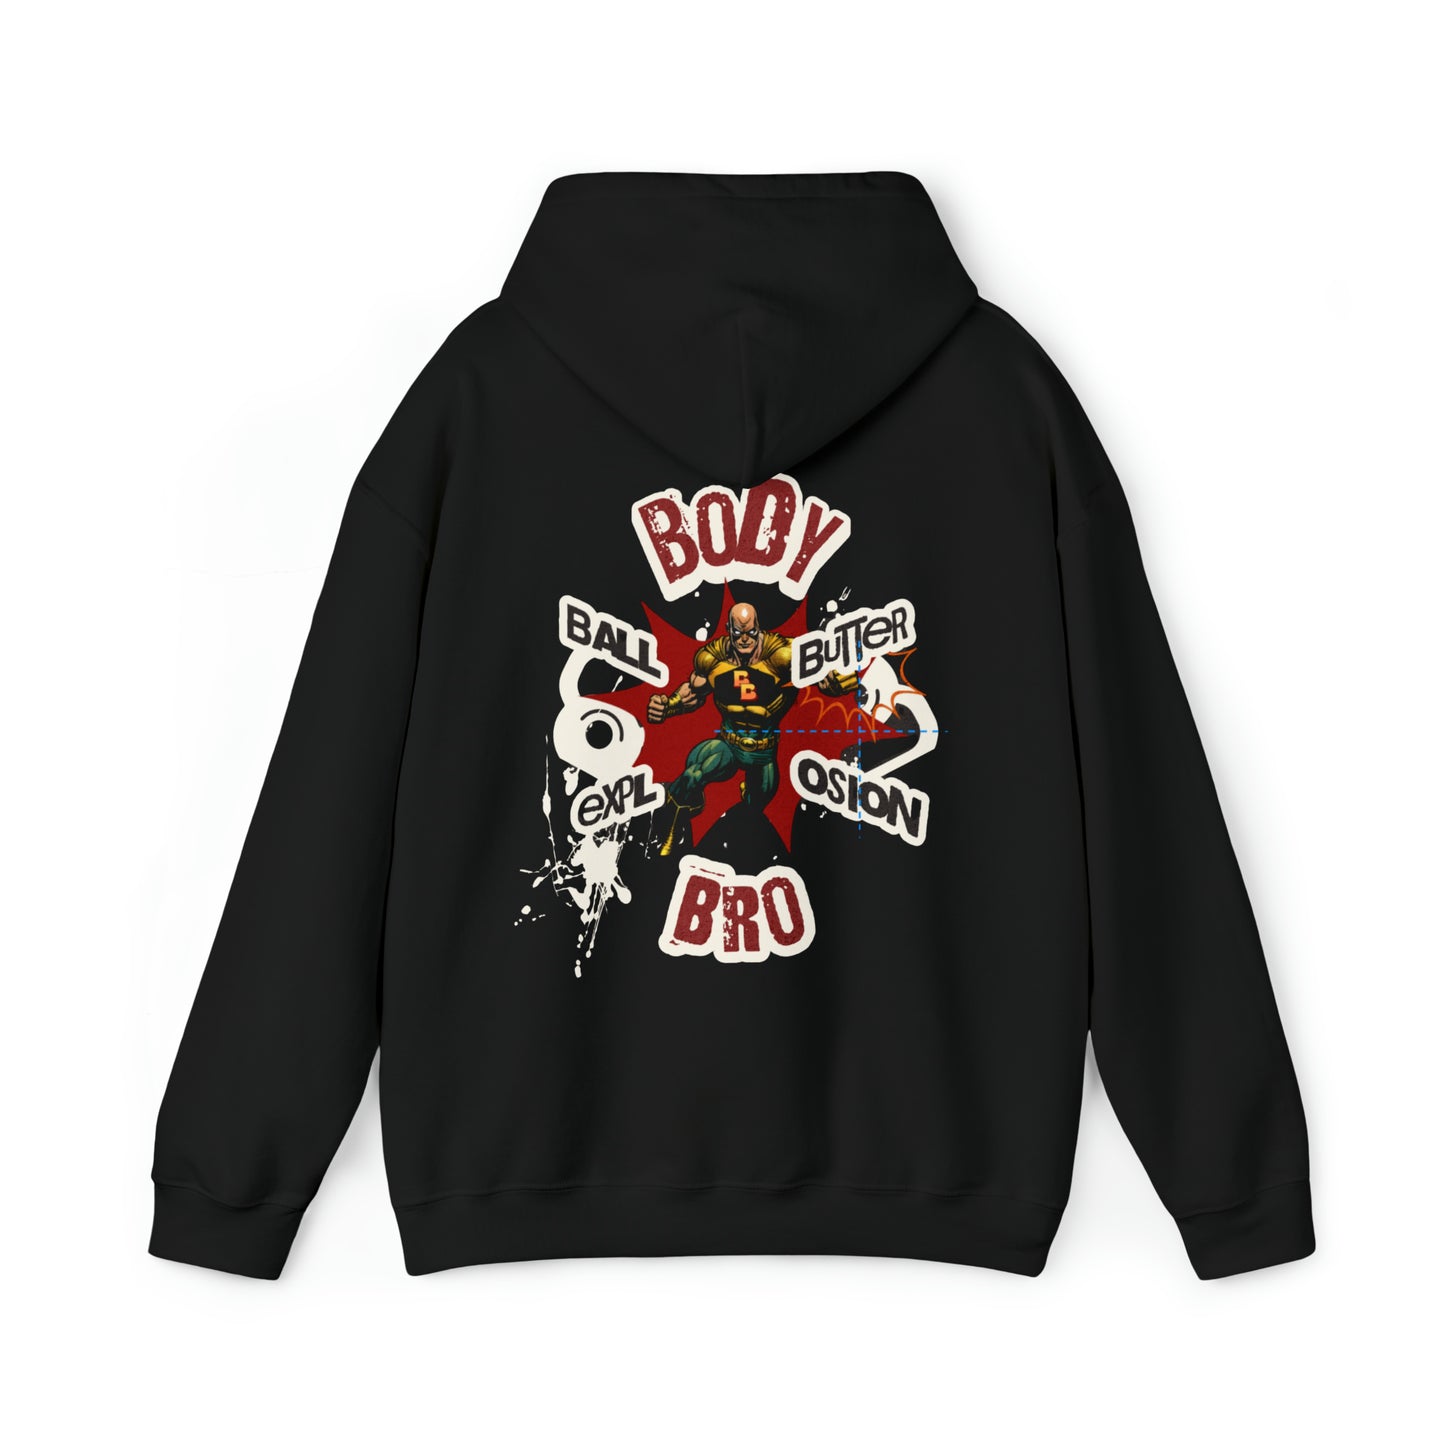 Body Bro Fusion Ball Butter Unisex Heavy Blend™ Hooded Sweatshirt, Humorous Workout Hoodie, Gift for Gym Enthusiasts, Trendy Urban Fashion Pullover, Unique Graphic Apparel